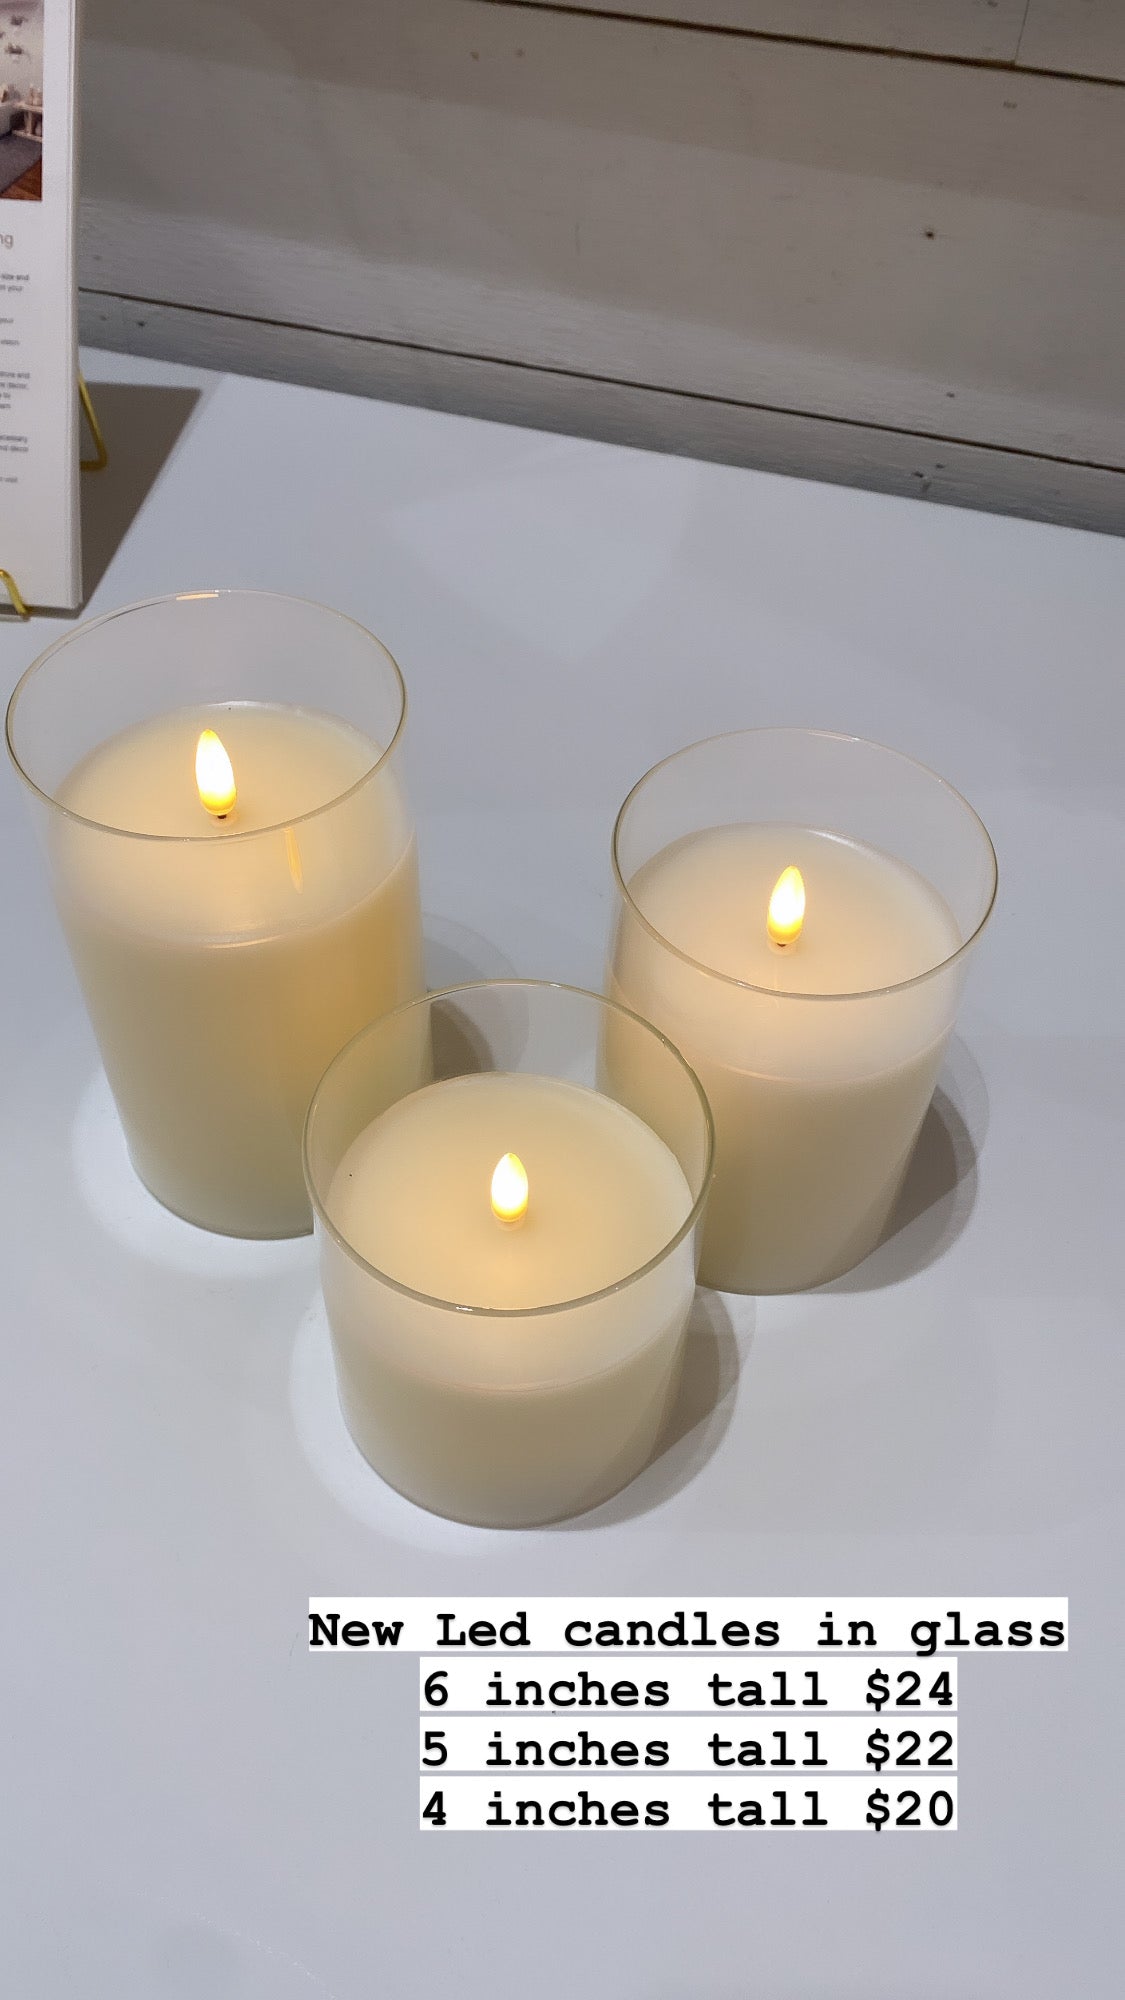 LED Candles in Glass, 3 sizes